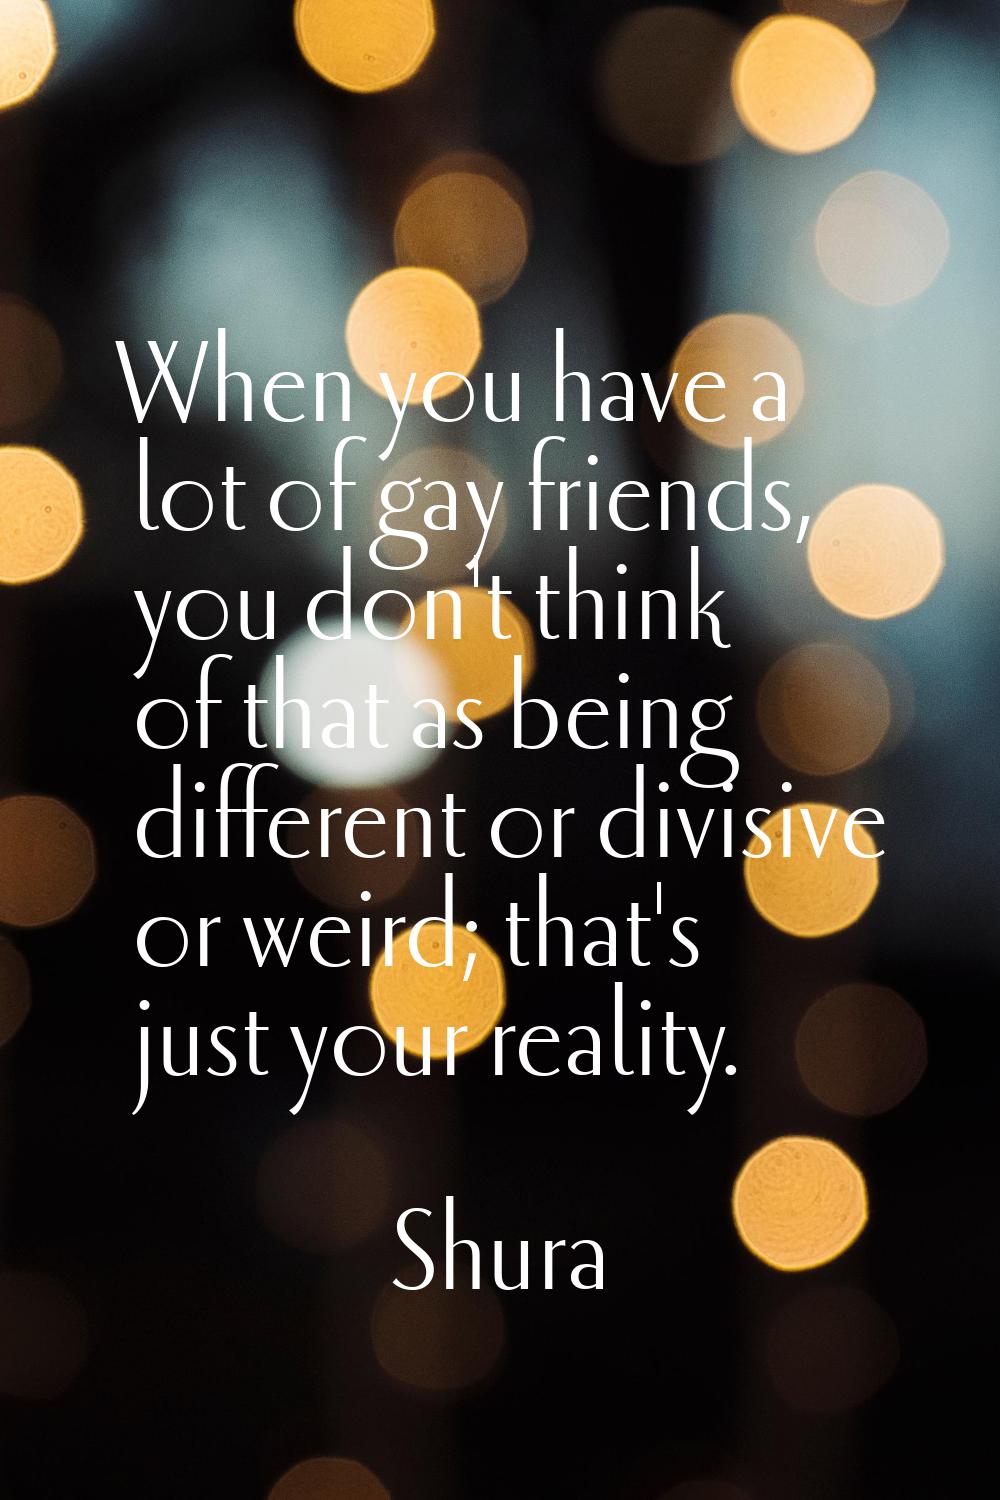 When you have a lot of gay friends, you don't think of that as being different or divisive or weird